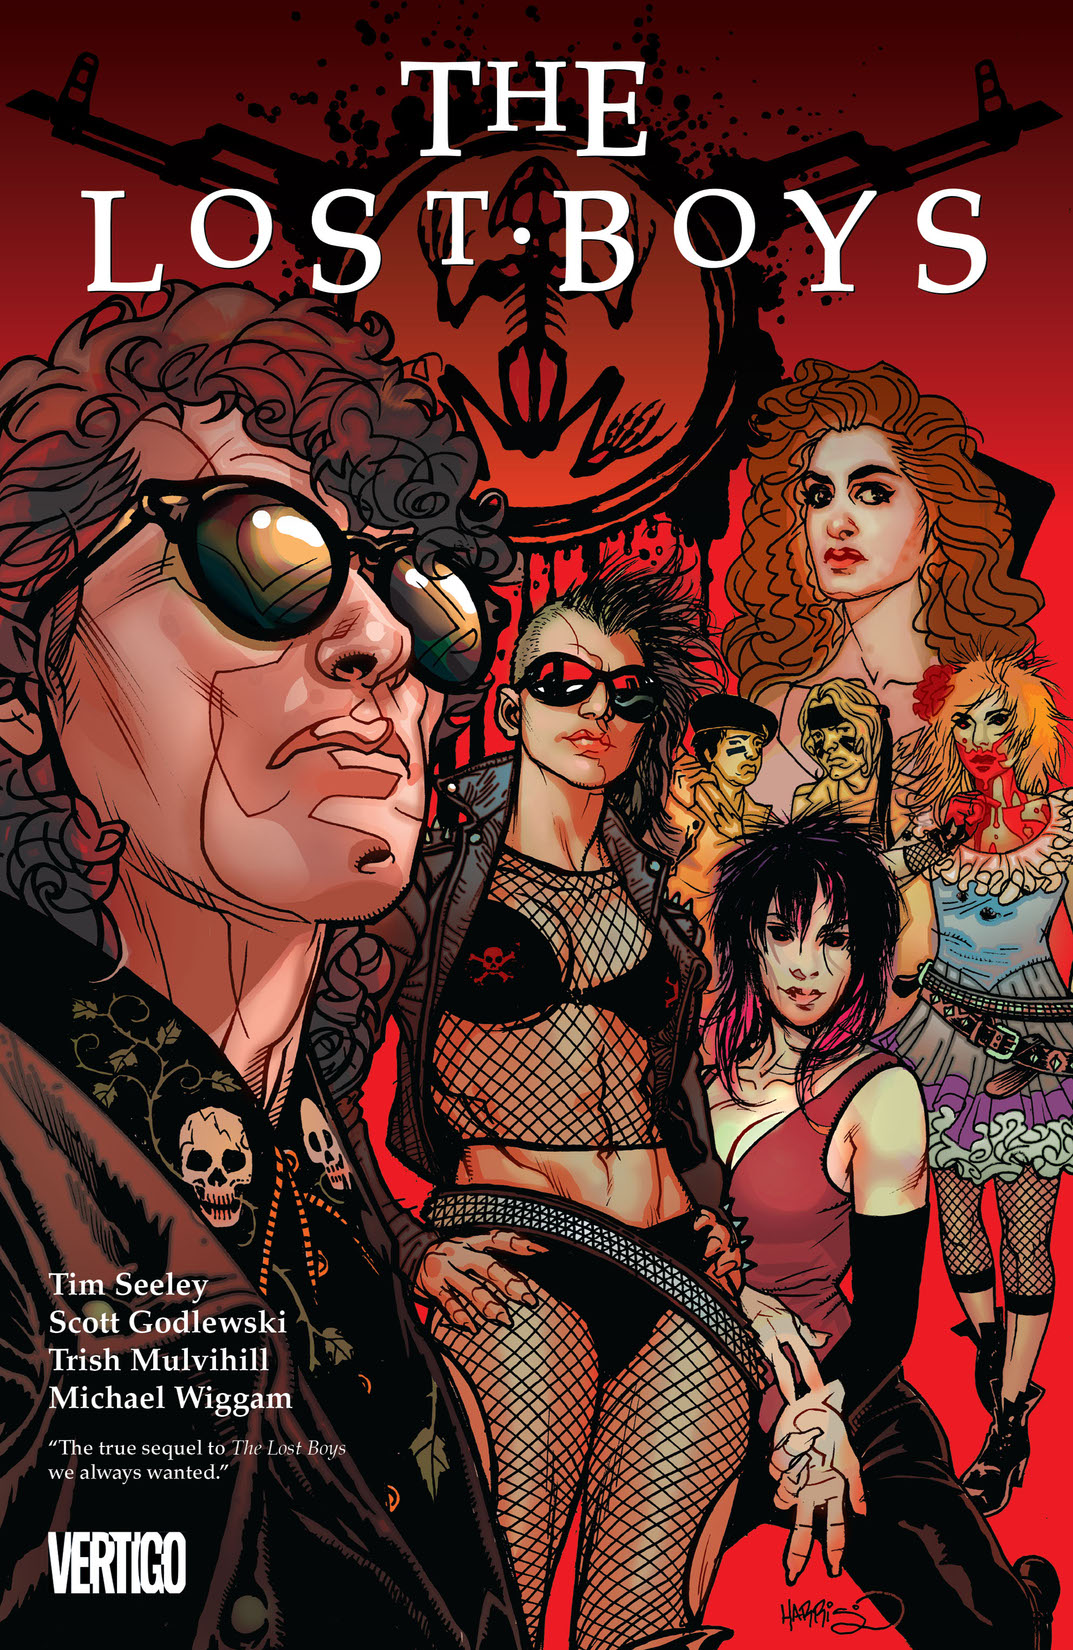 The Lost Boys Vol. 1 preview images